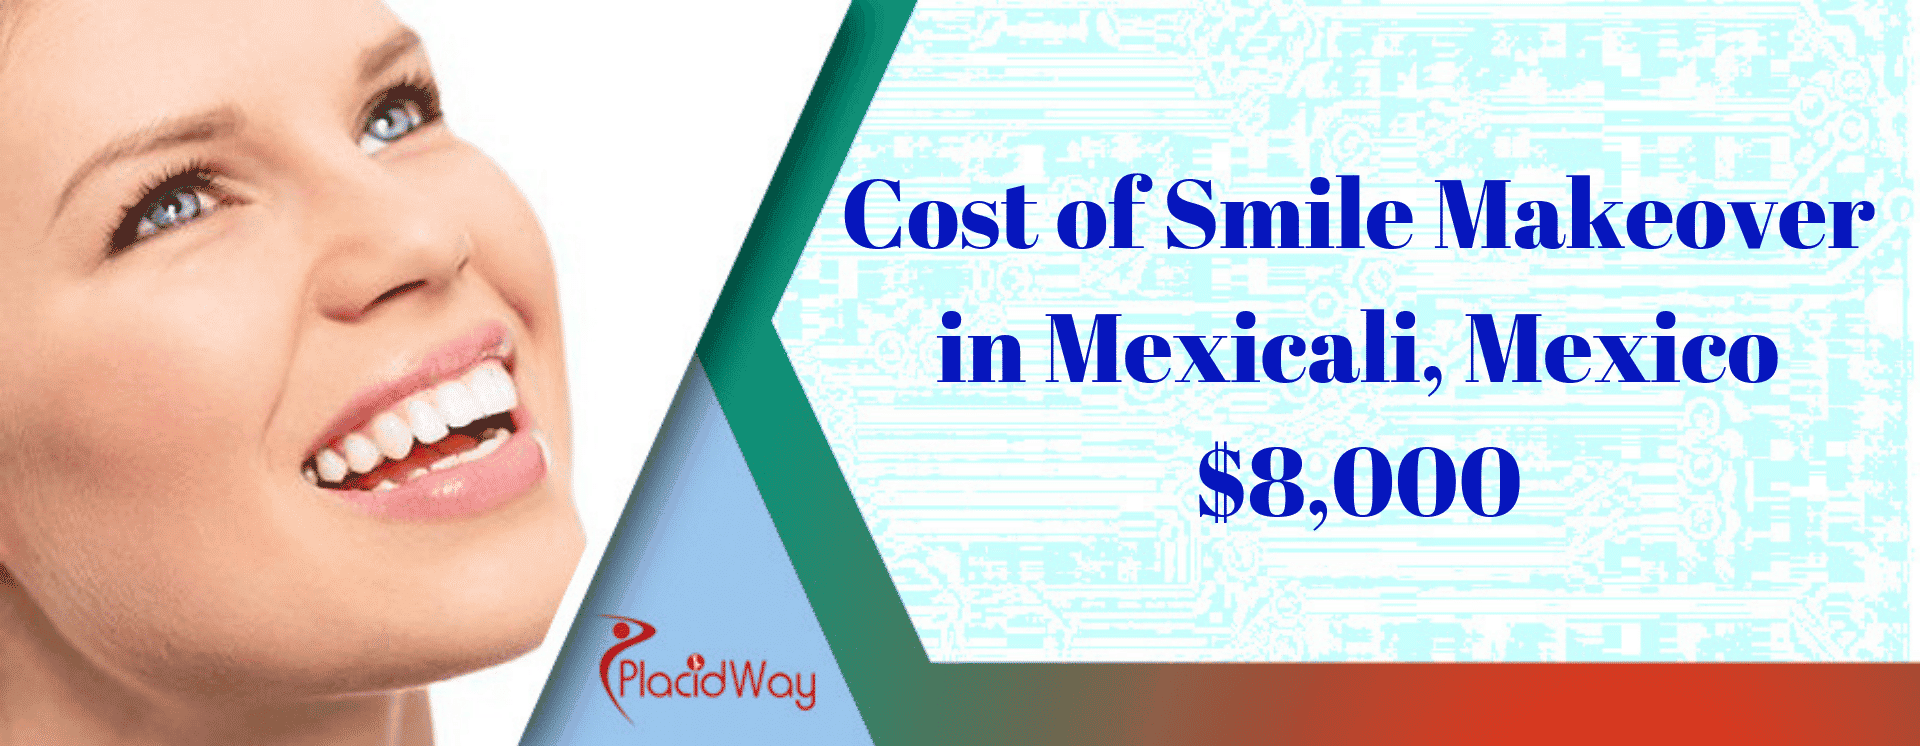 Cost of Smile Makeover in Mexicali, Mexico